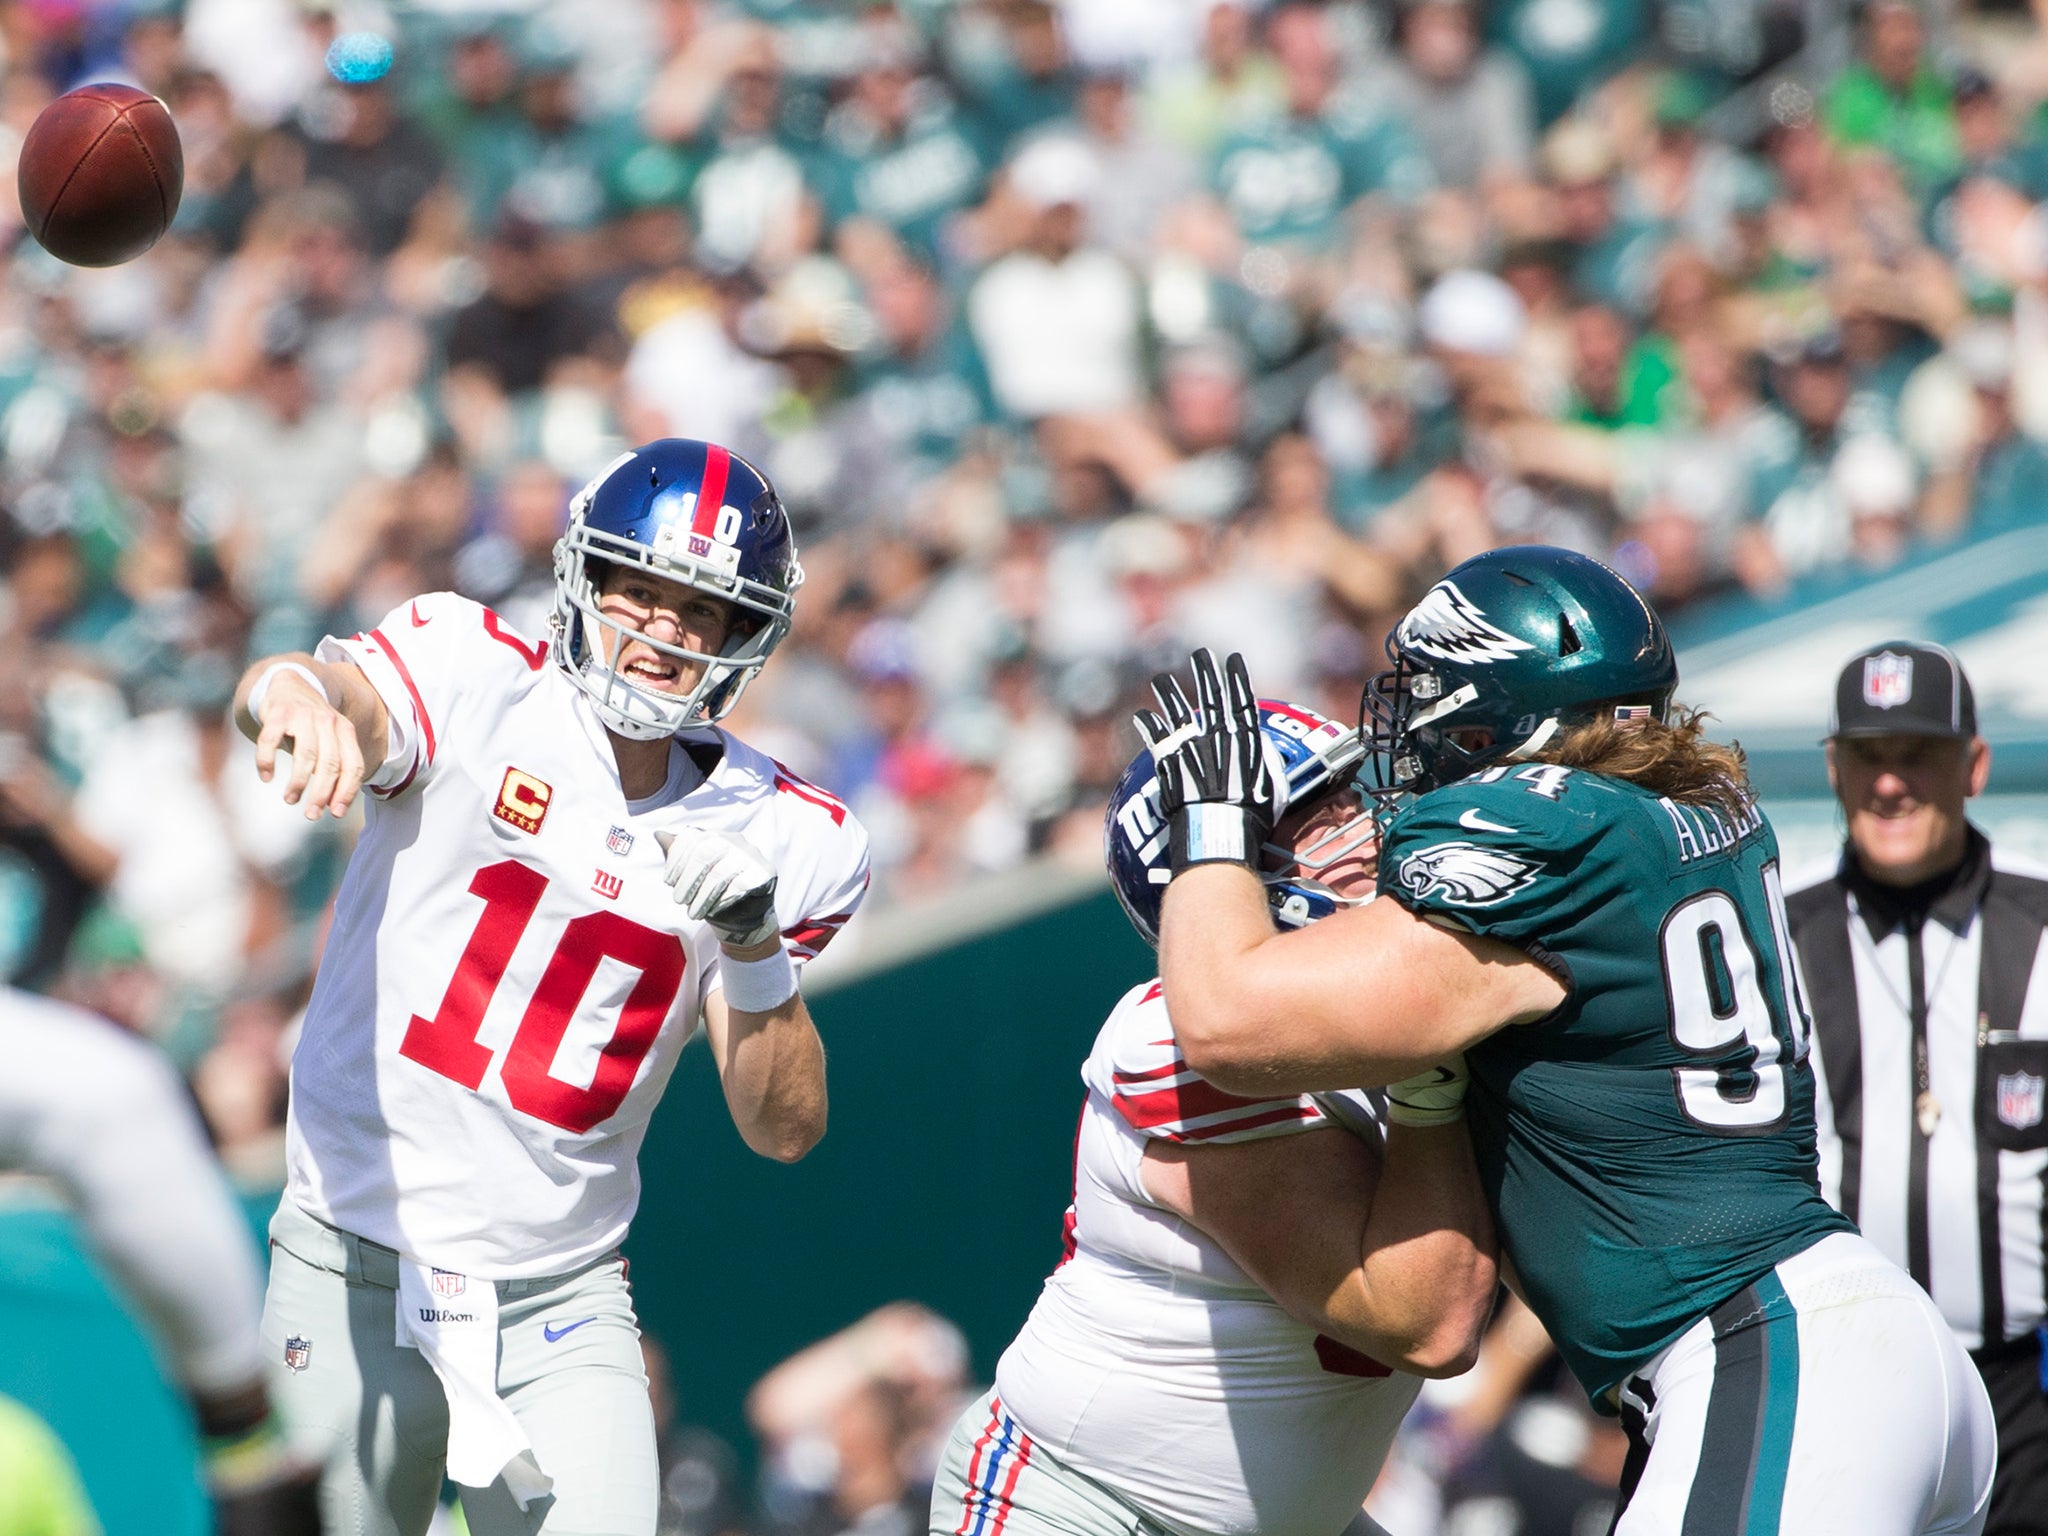 Eli Manning's late rally was not enough to record the Giant's first win of the season